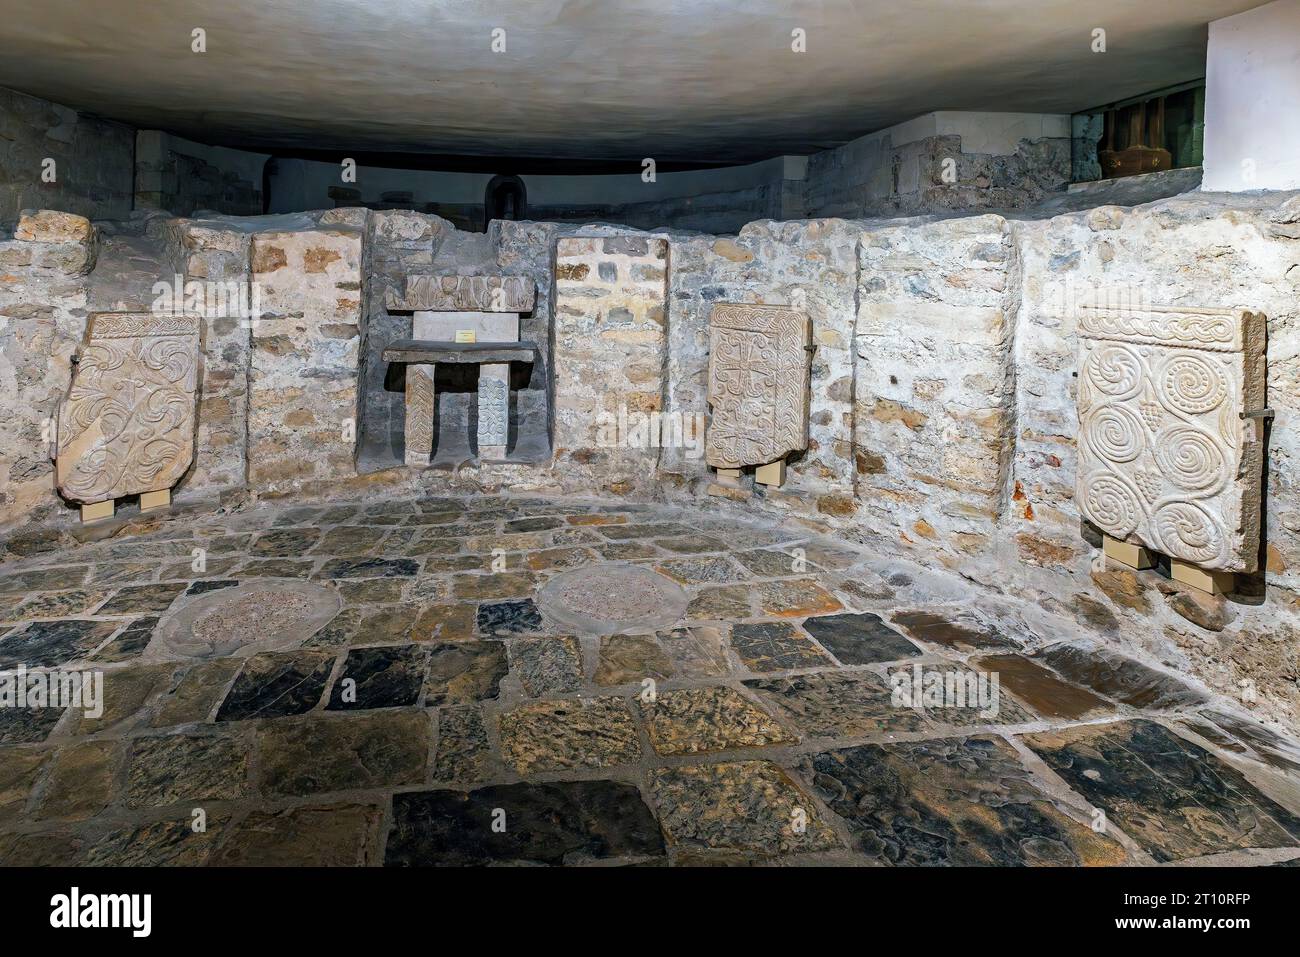 Exhibited in the crypt of the cathedral in Ventimiglia are the remains of an older Lombard church. Liguria, Italy. Stock Photo